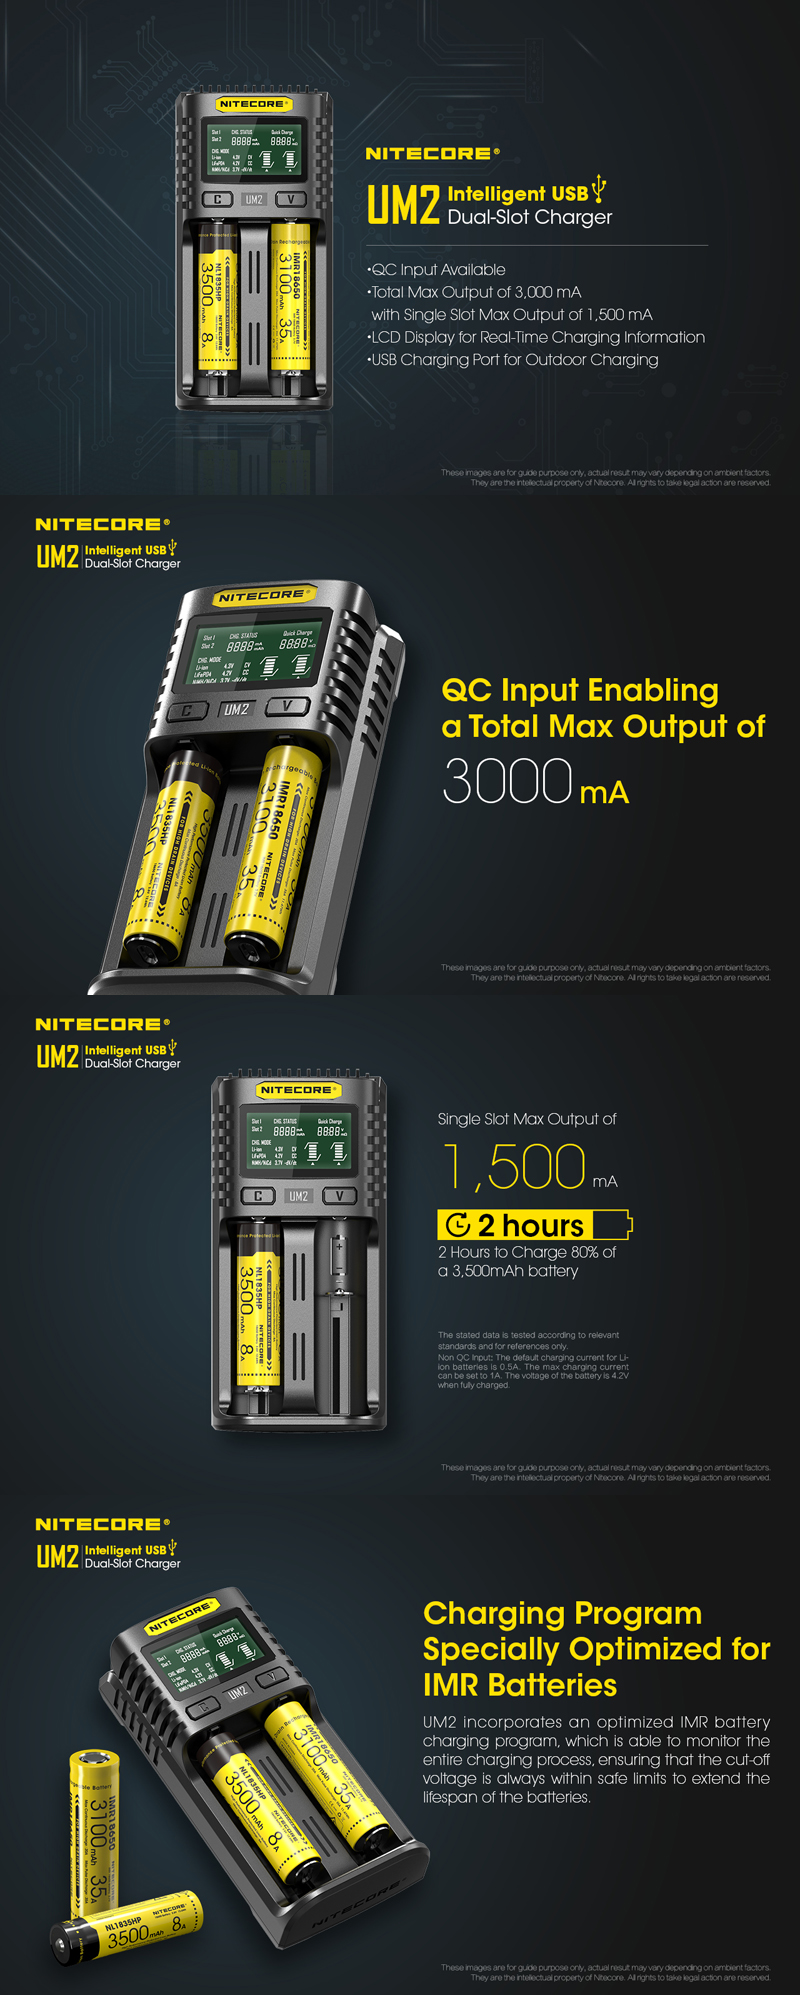 NITECORE UM2 LCD Display 5V/2A Lithium Battery Charger USB QC Smart Rapid Charger For AA AAA 18650 21700 26650